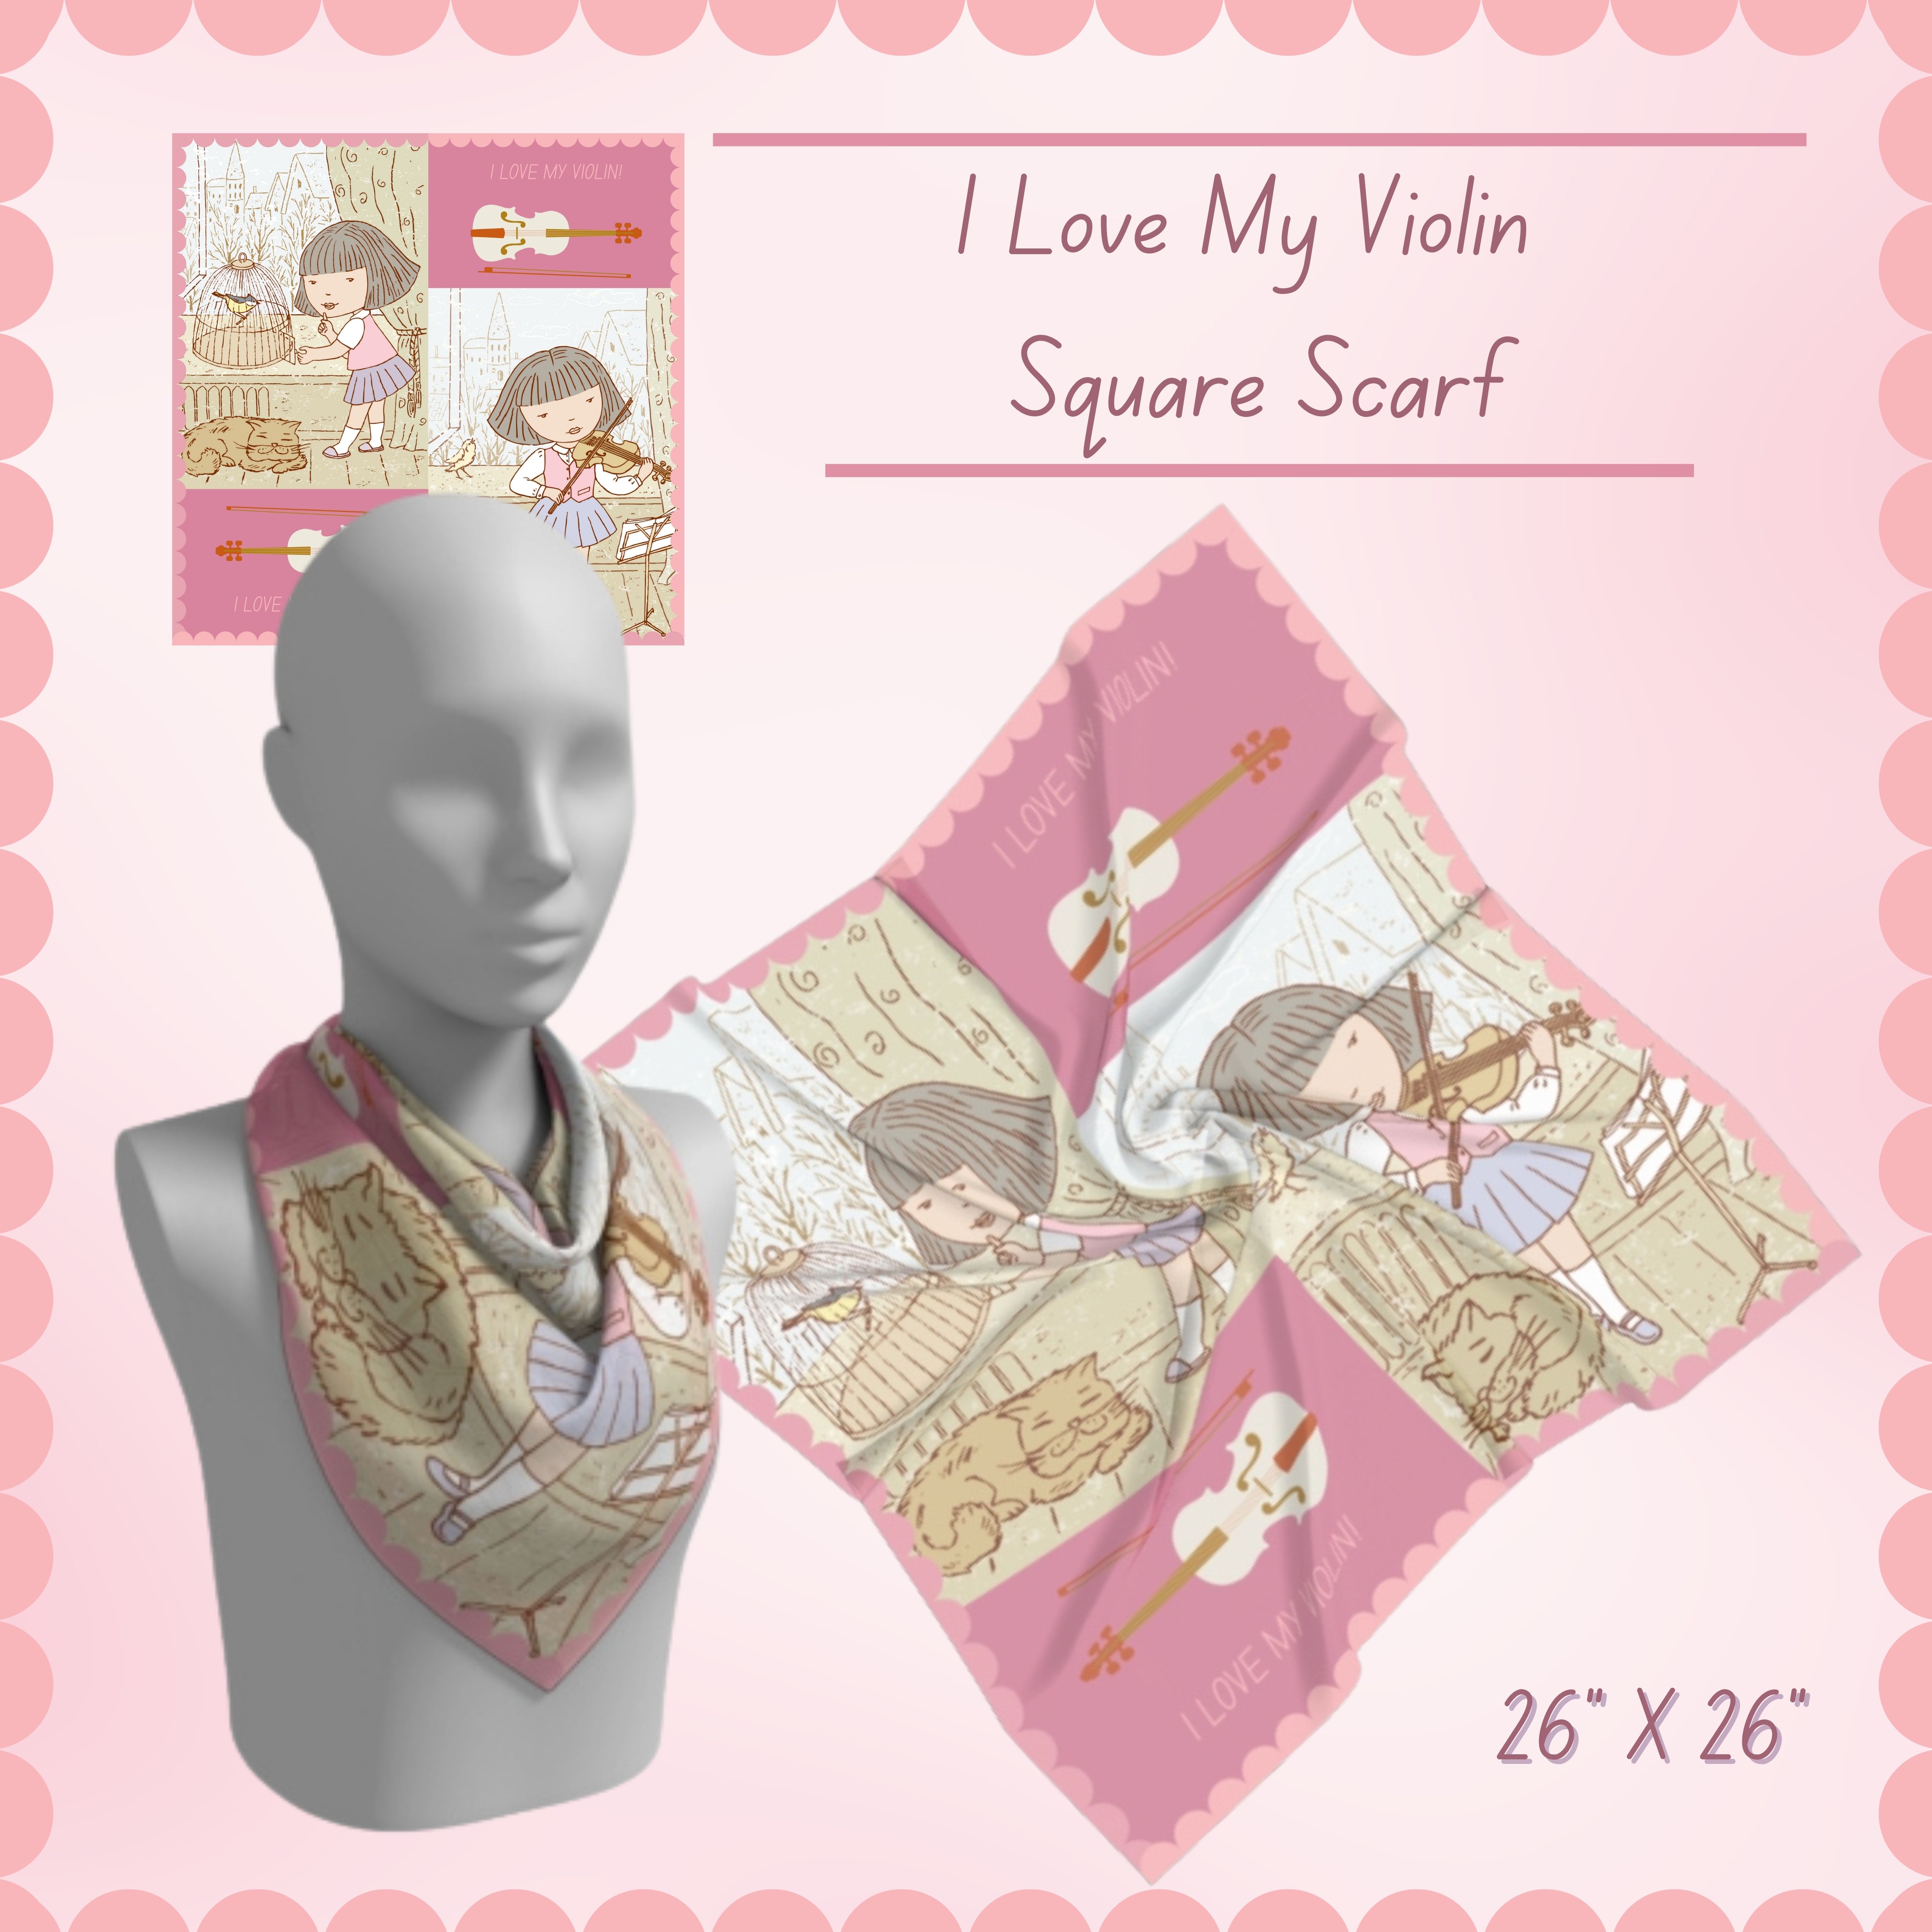 Gift Idea for violinists - violin scarf